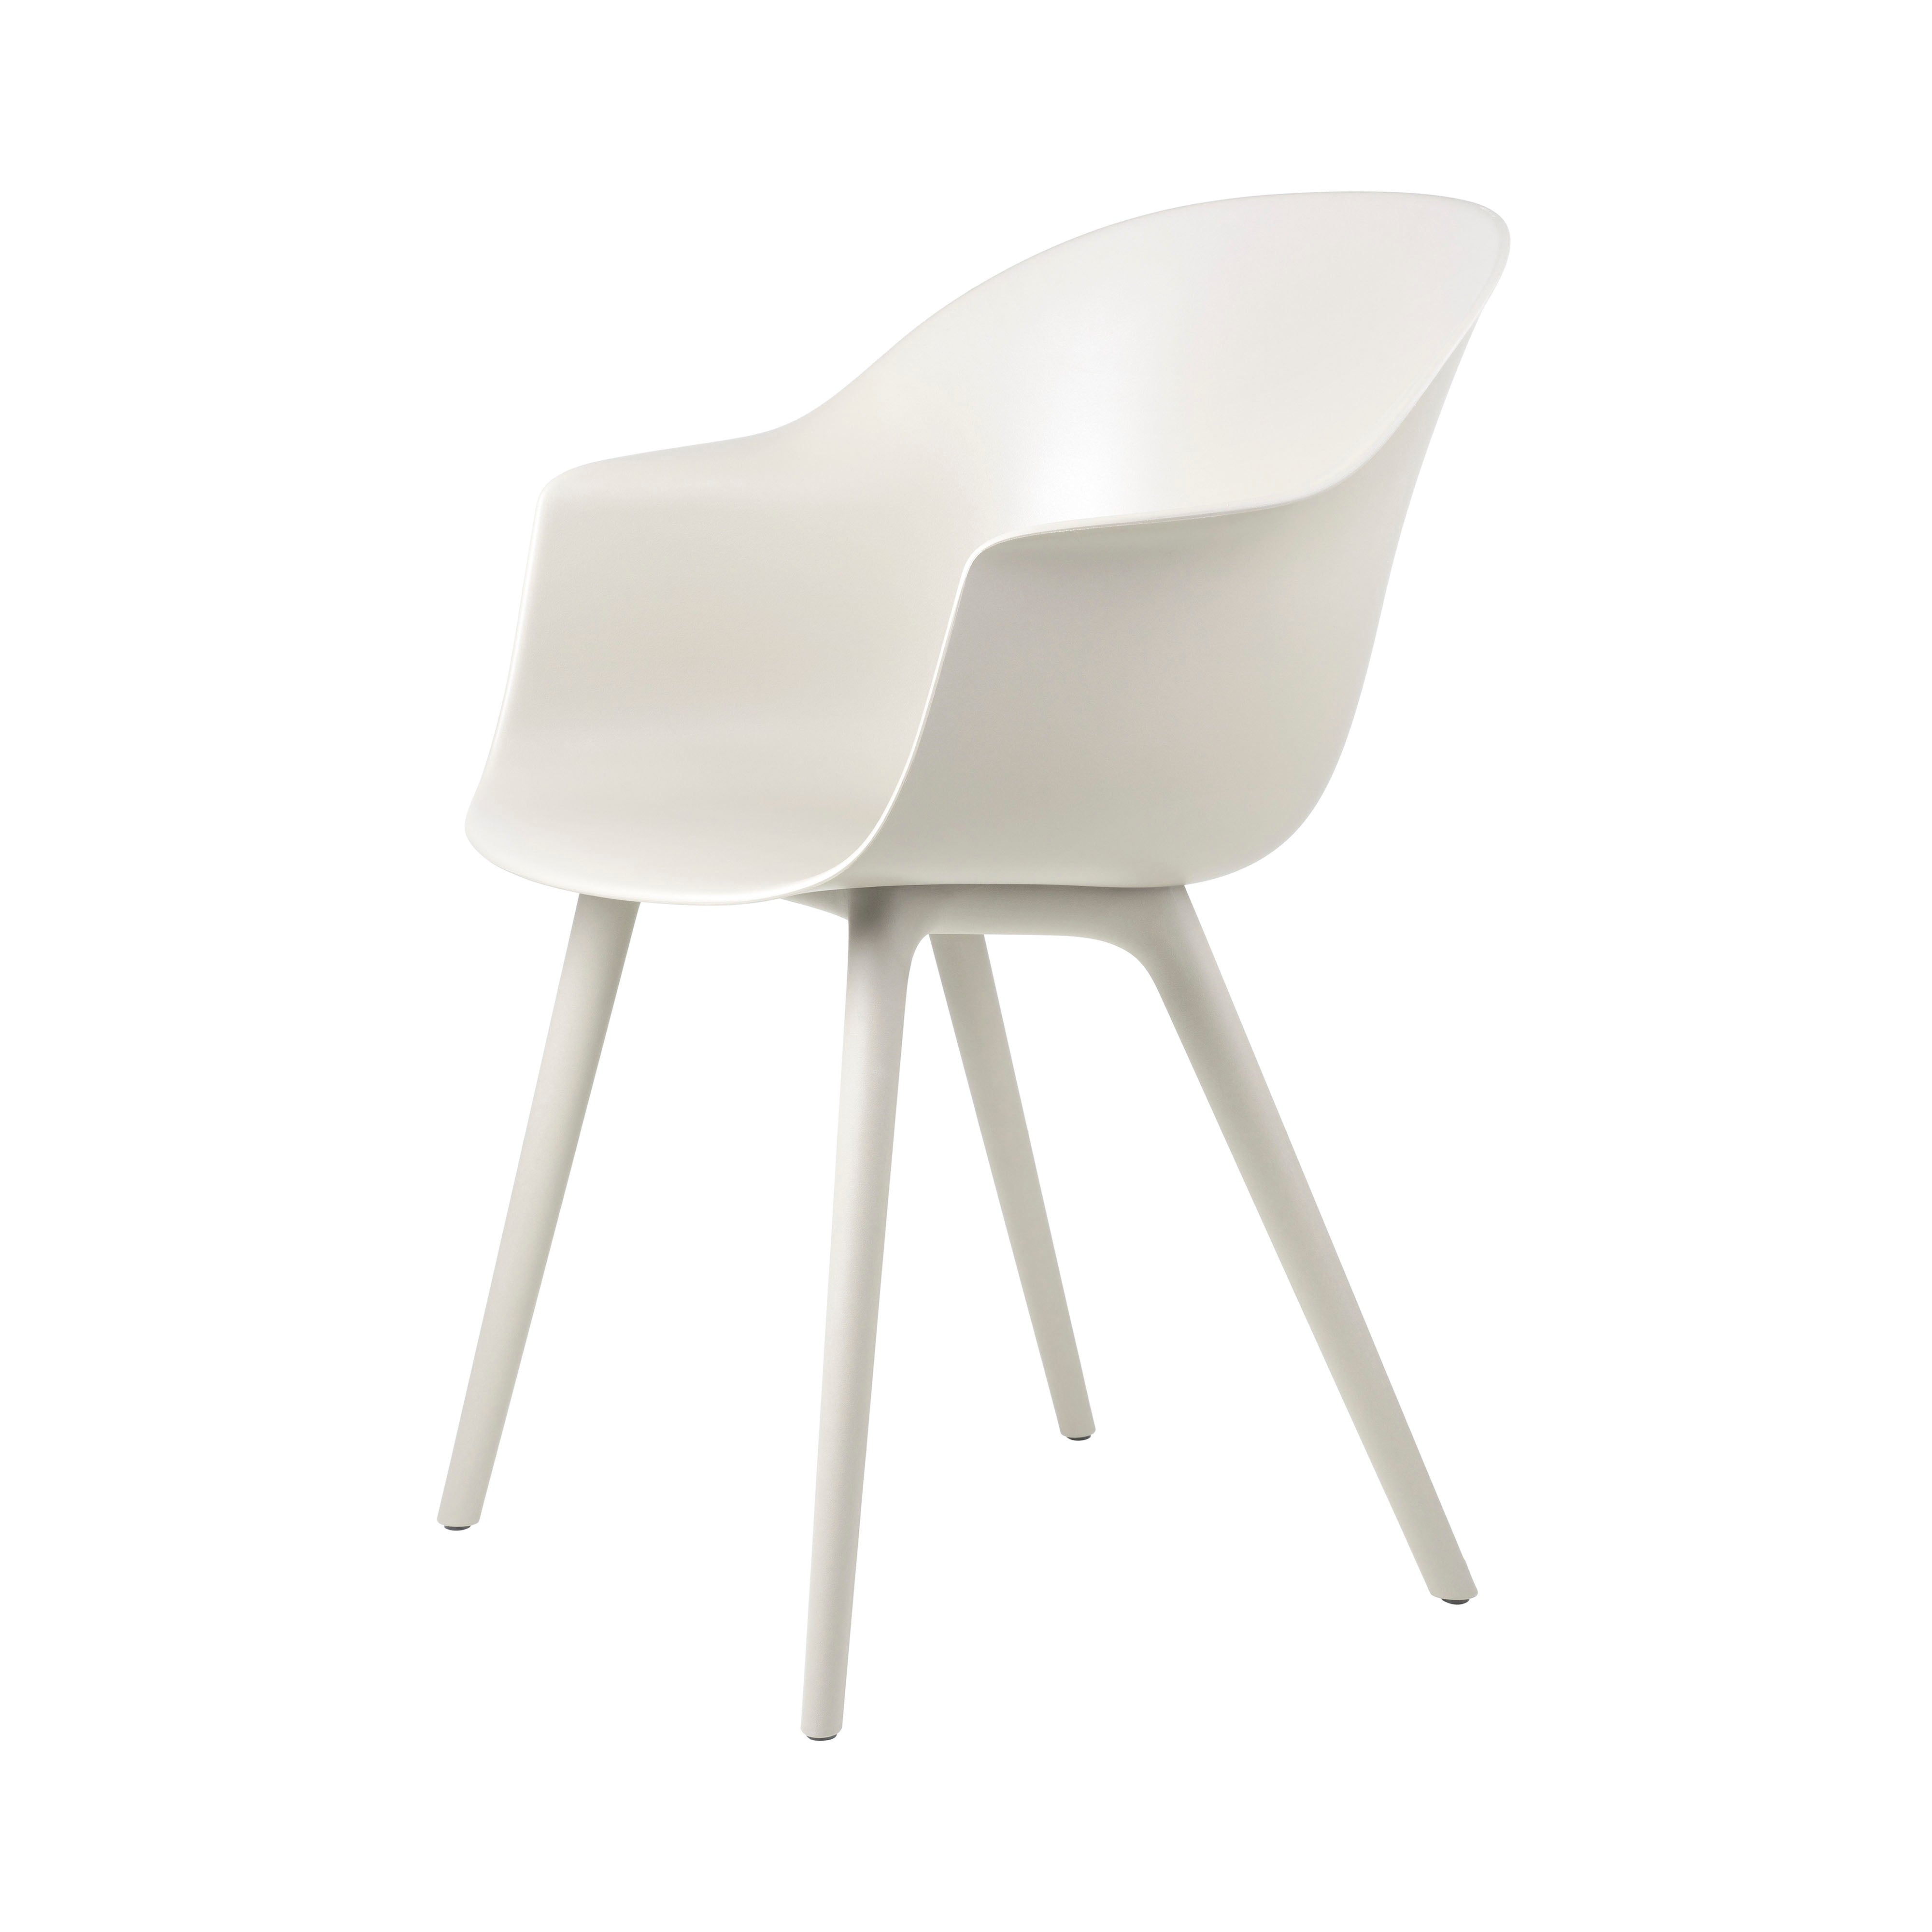 Bat Outdoor Dining Chair: Plastic Base + Alabaster White + Without Cushion